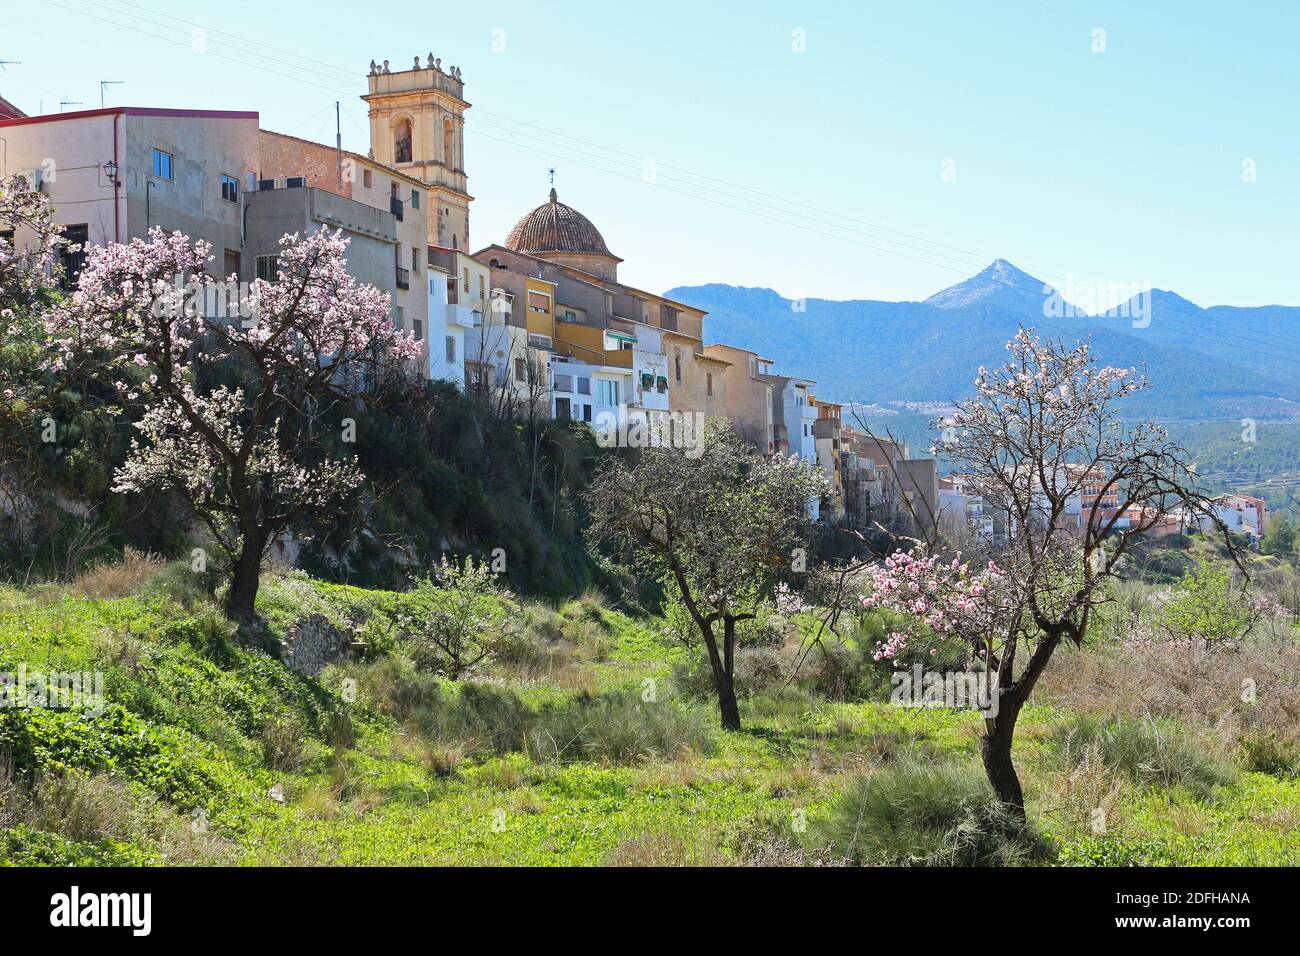 Tibi is a quiet town, population less than 2000. It's located north of Alicante and is a good place to start country walks. Almond trees blossoming. Stock Photo